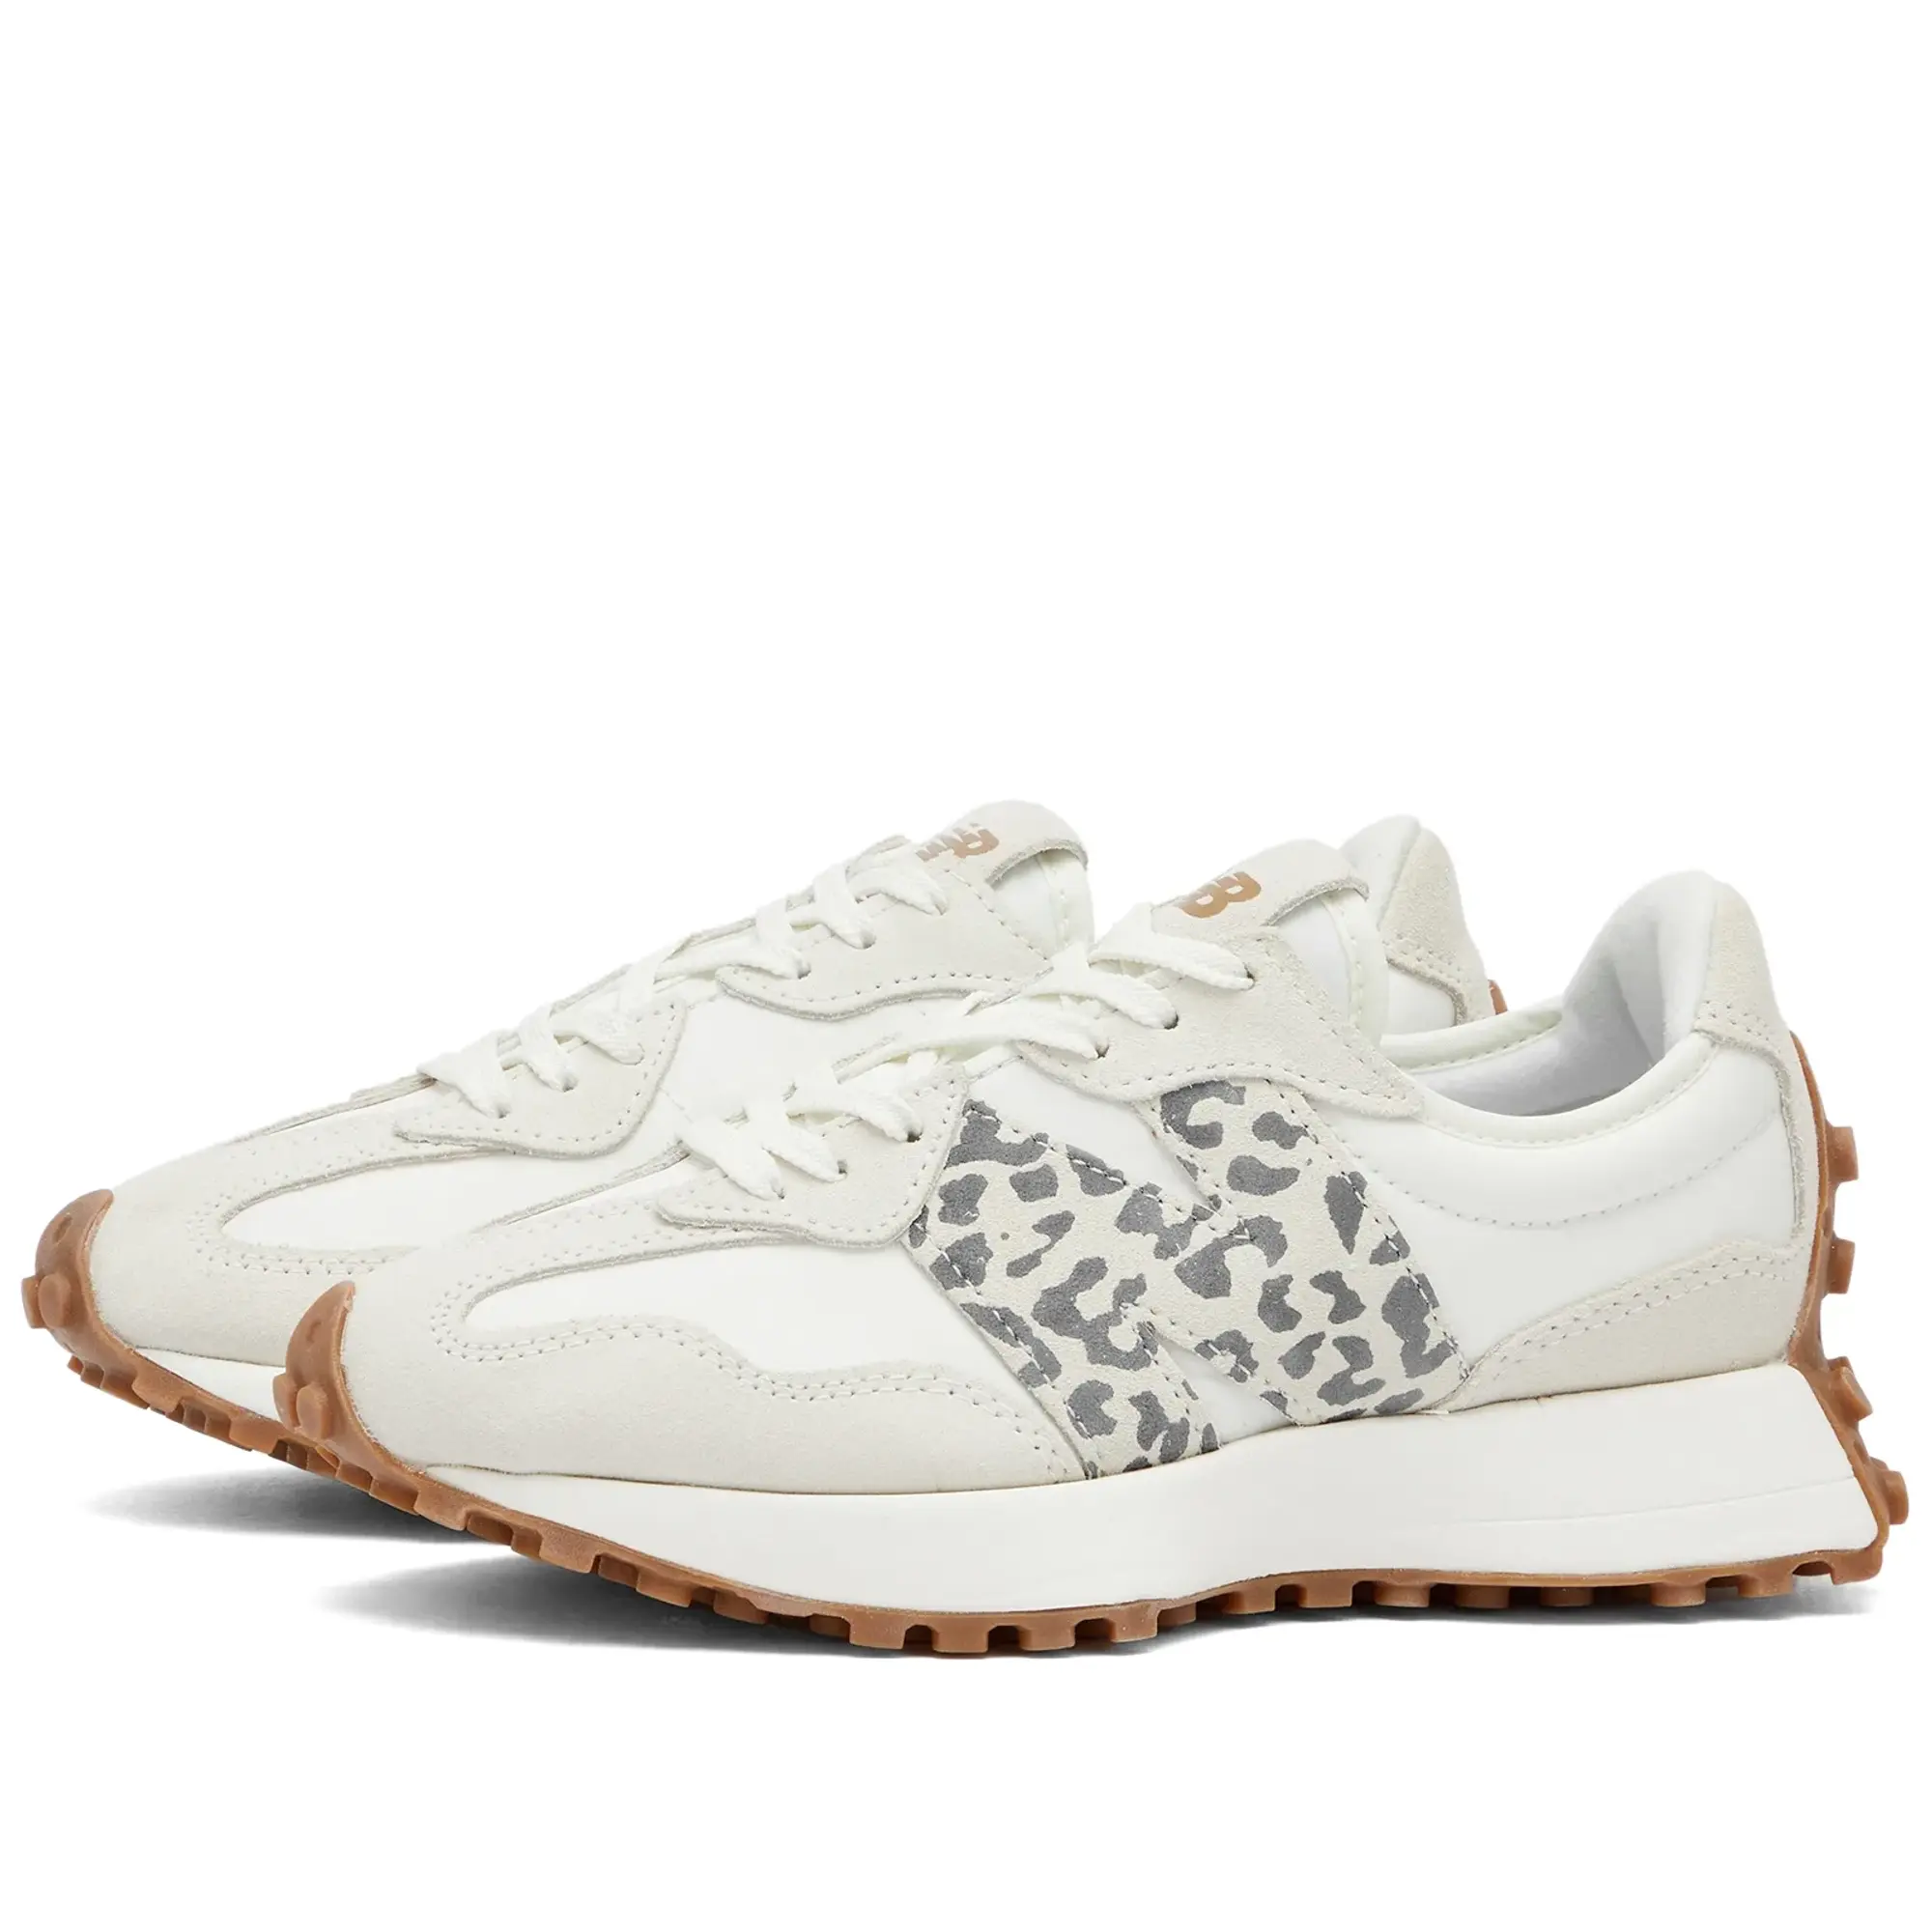 New Balance Women's 327 in White Suede/Mesh